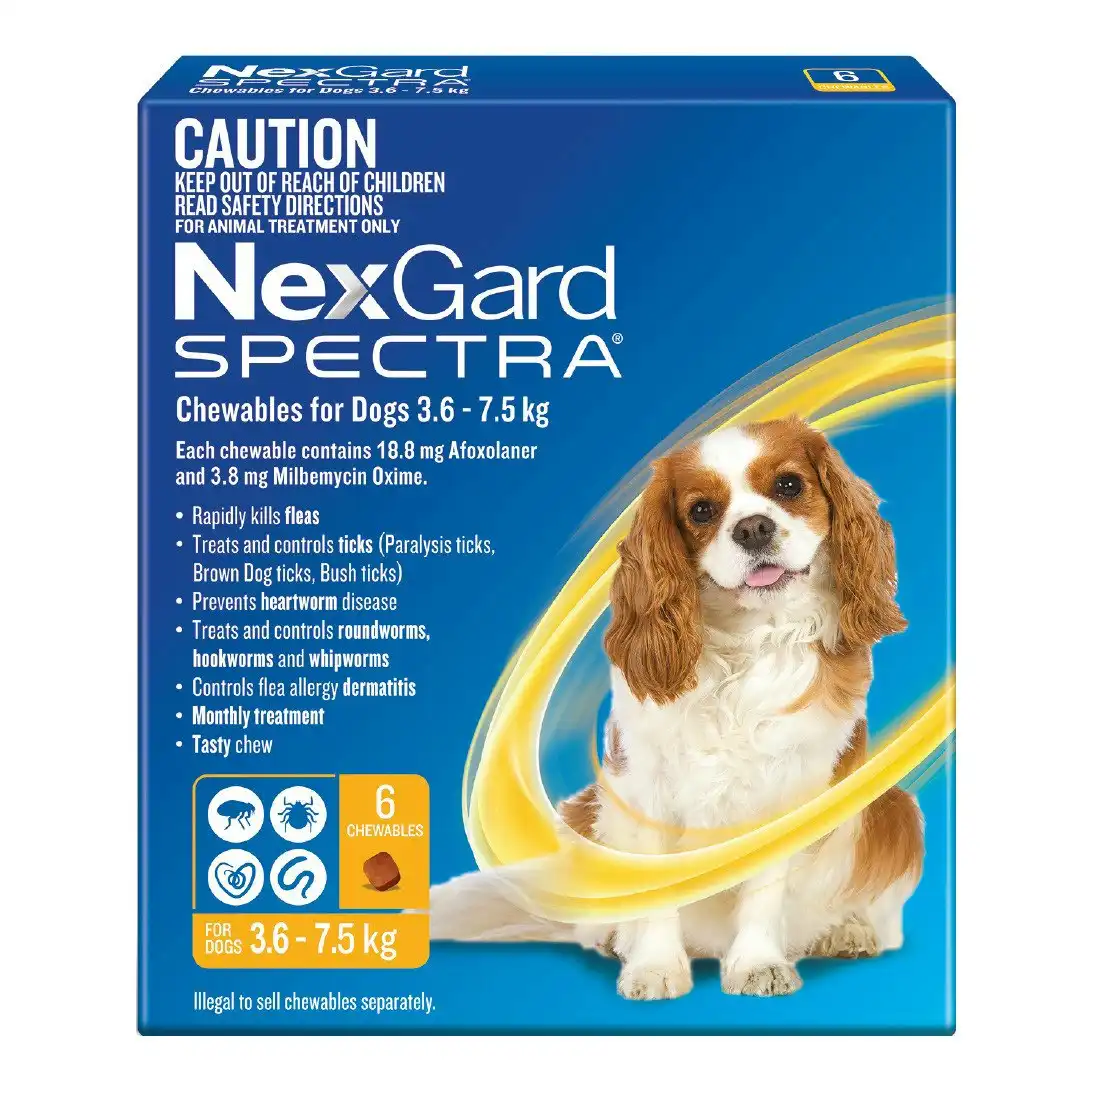 Nexgard Spectra Chewables For Dogs 3.6 - 7.5kg 6 Pack